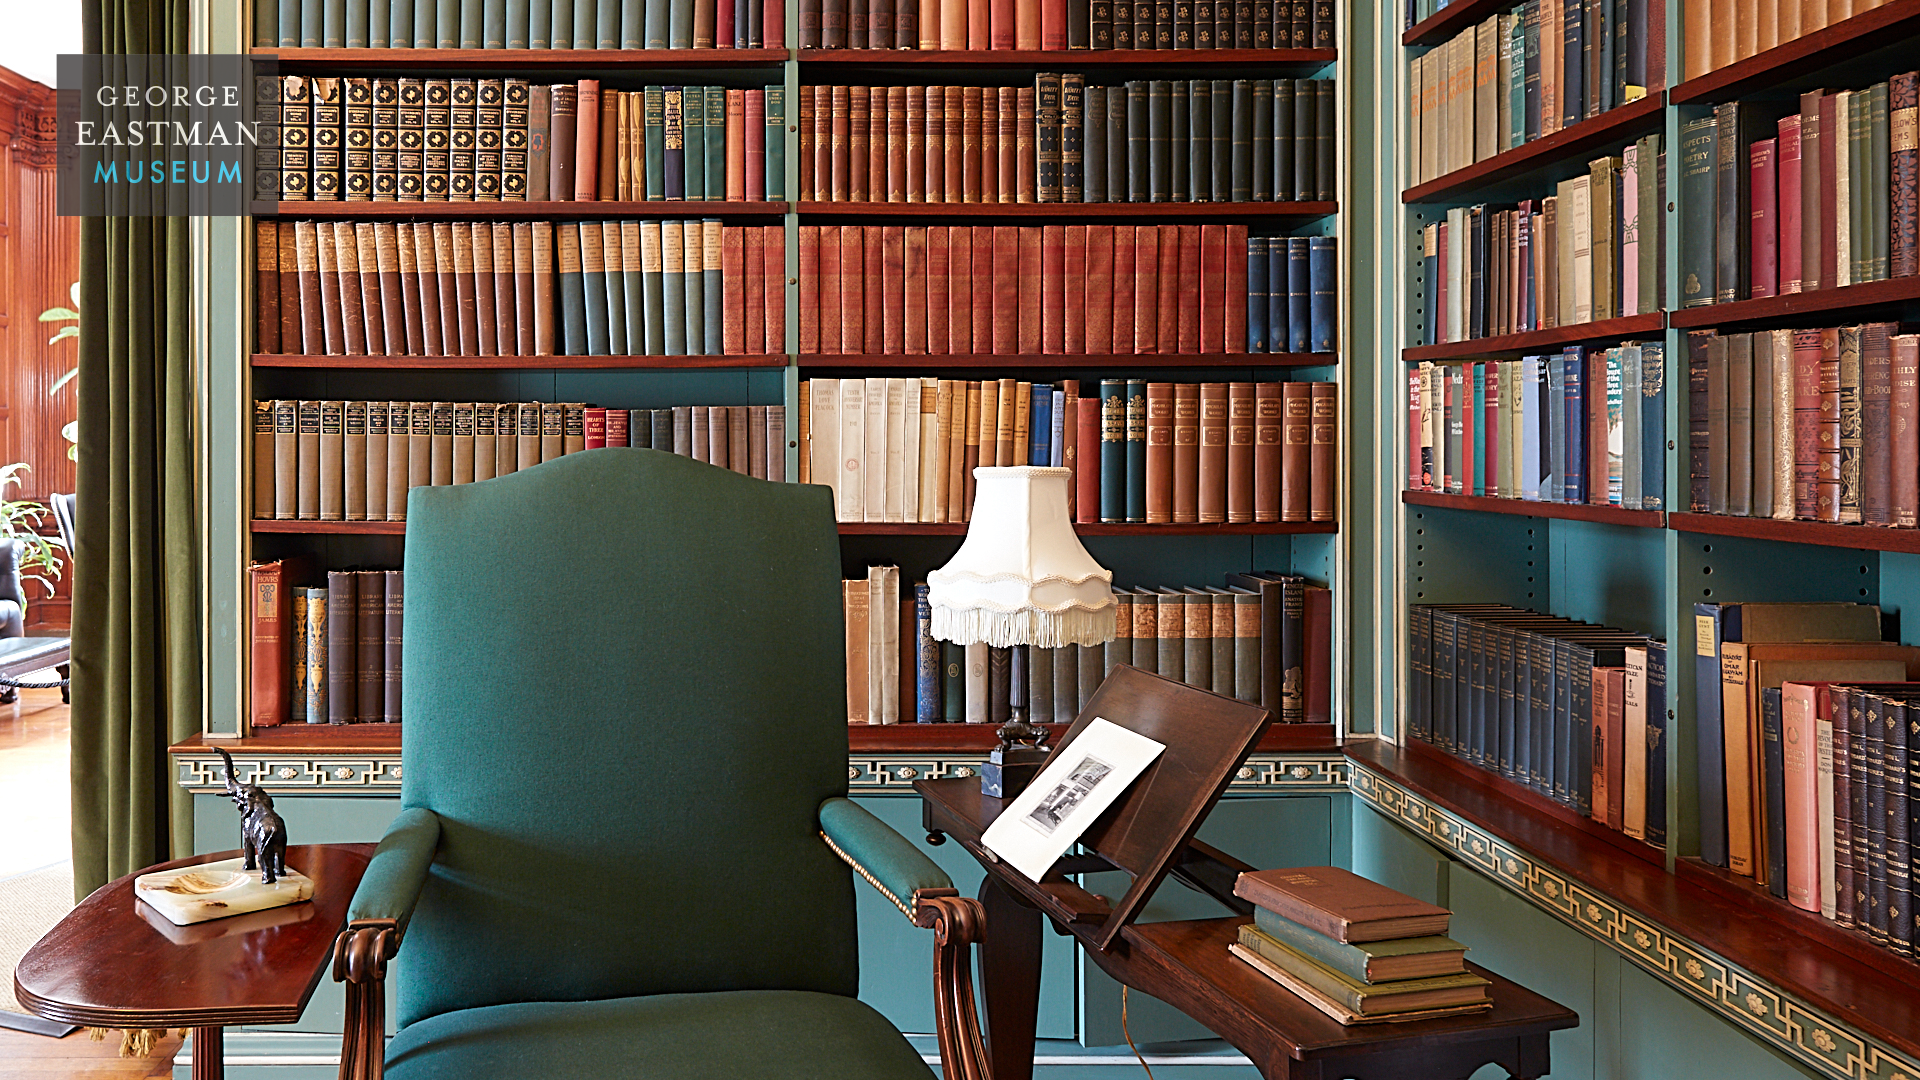 Here's a nice collection of photos for you to try! Zoom Background Library Room - Eastman Museum Zoom ...